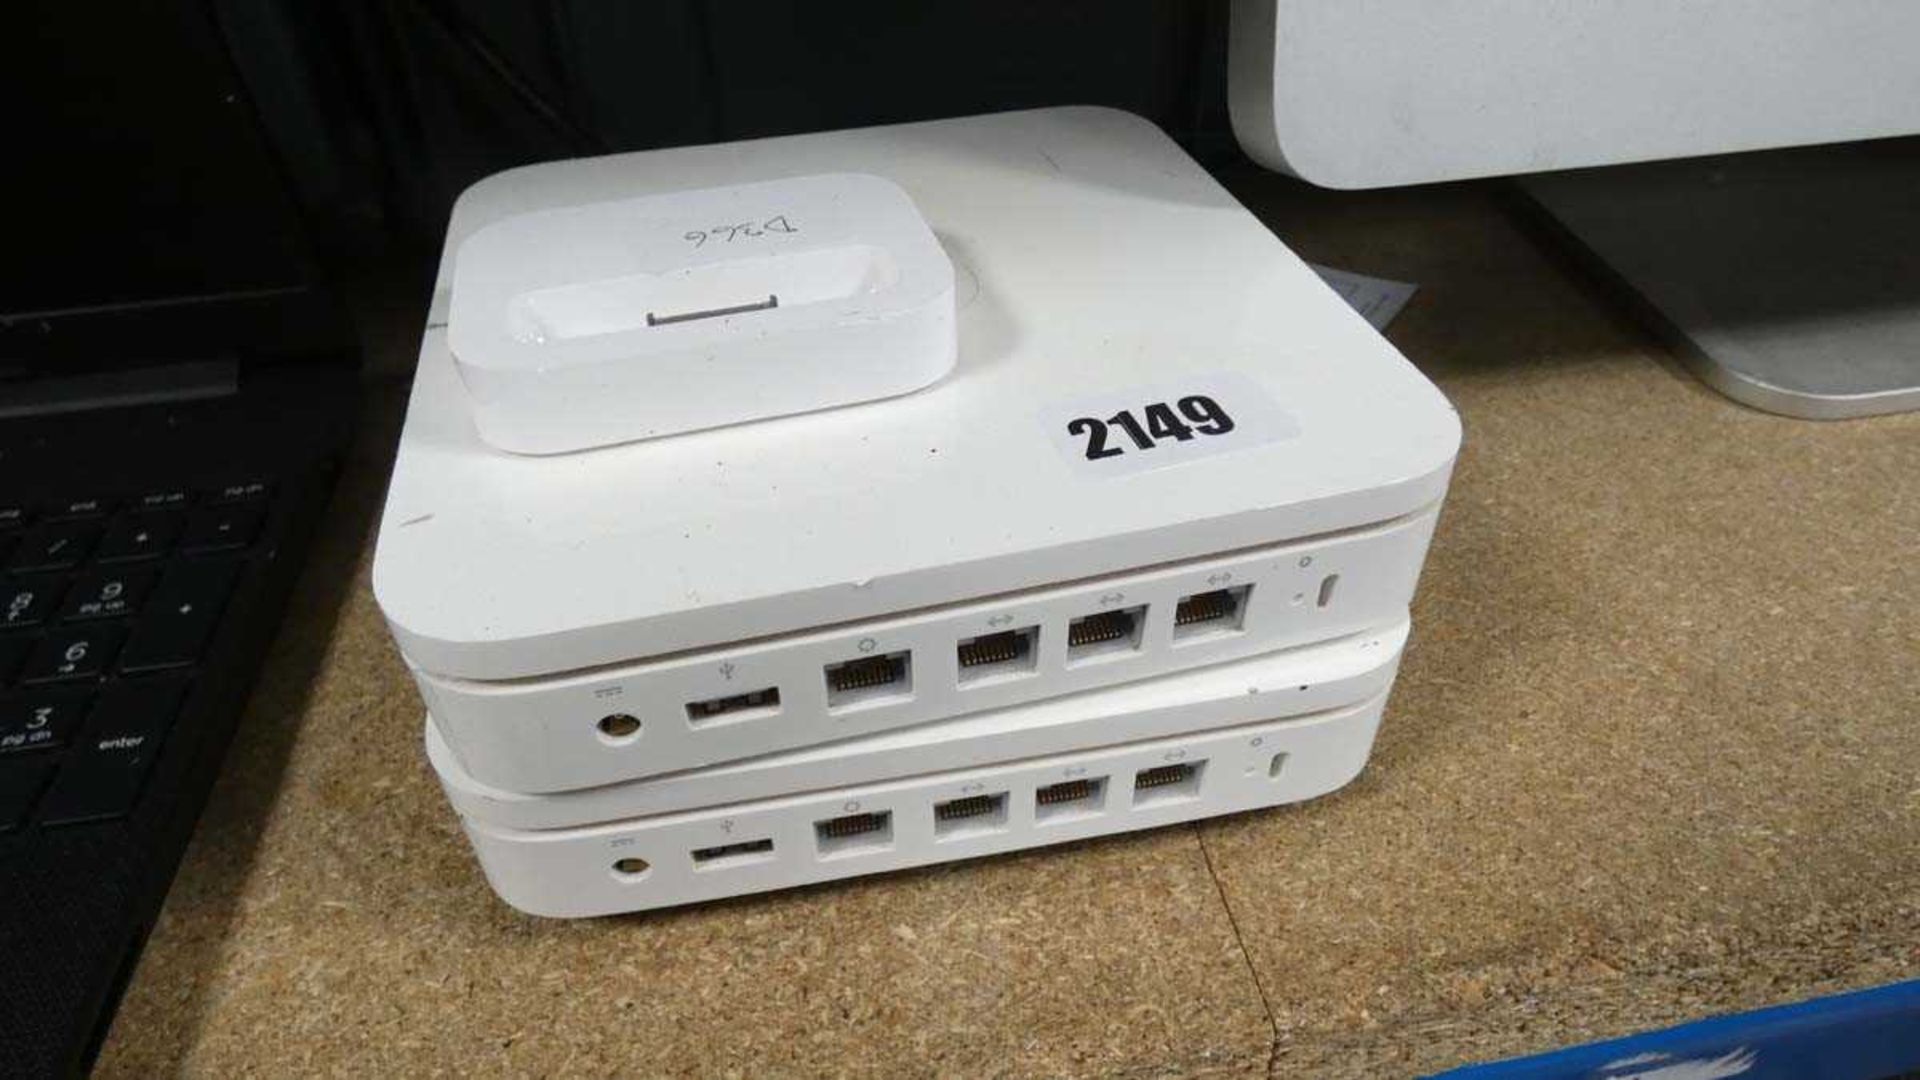 2x Apple airport stations and an Apple iPhone charging dock